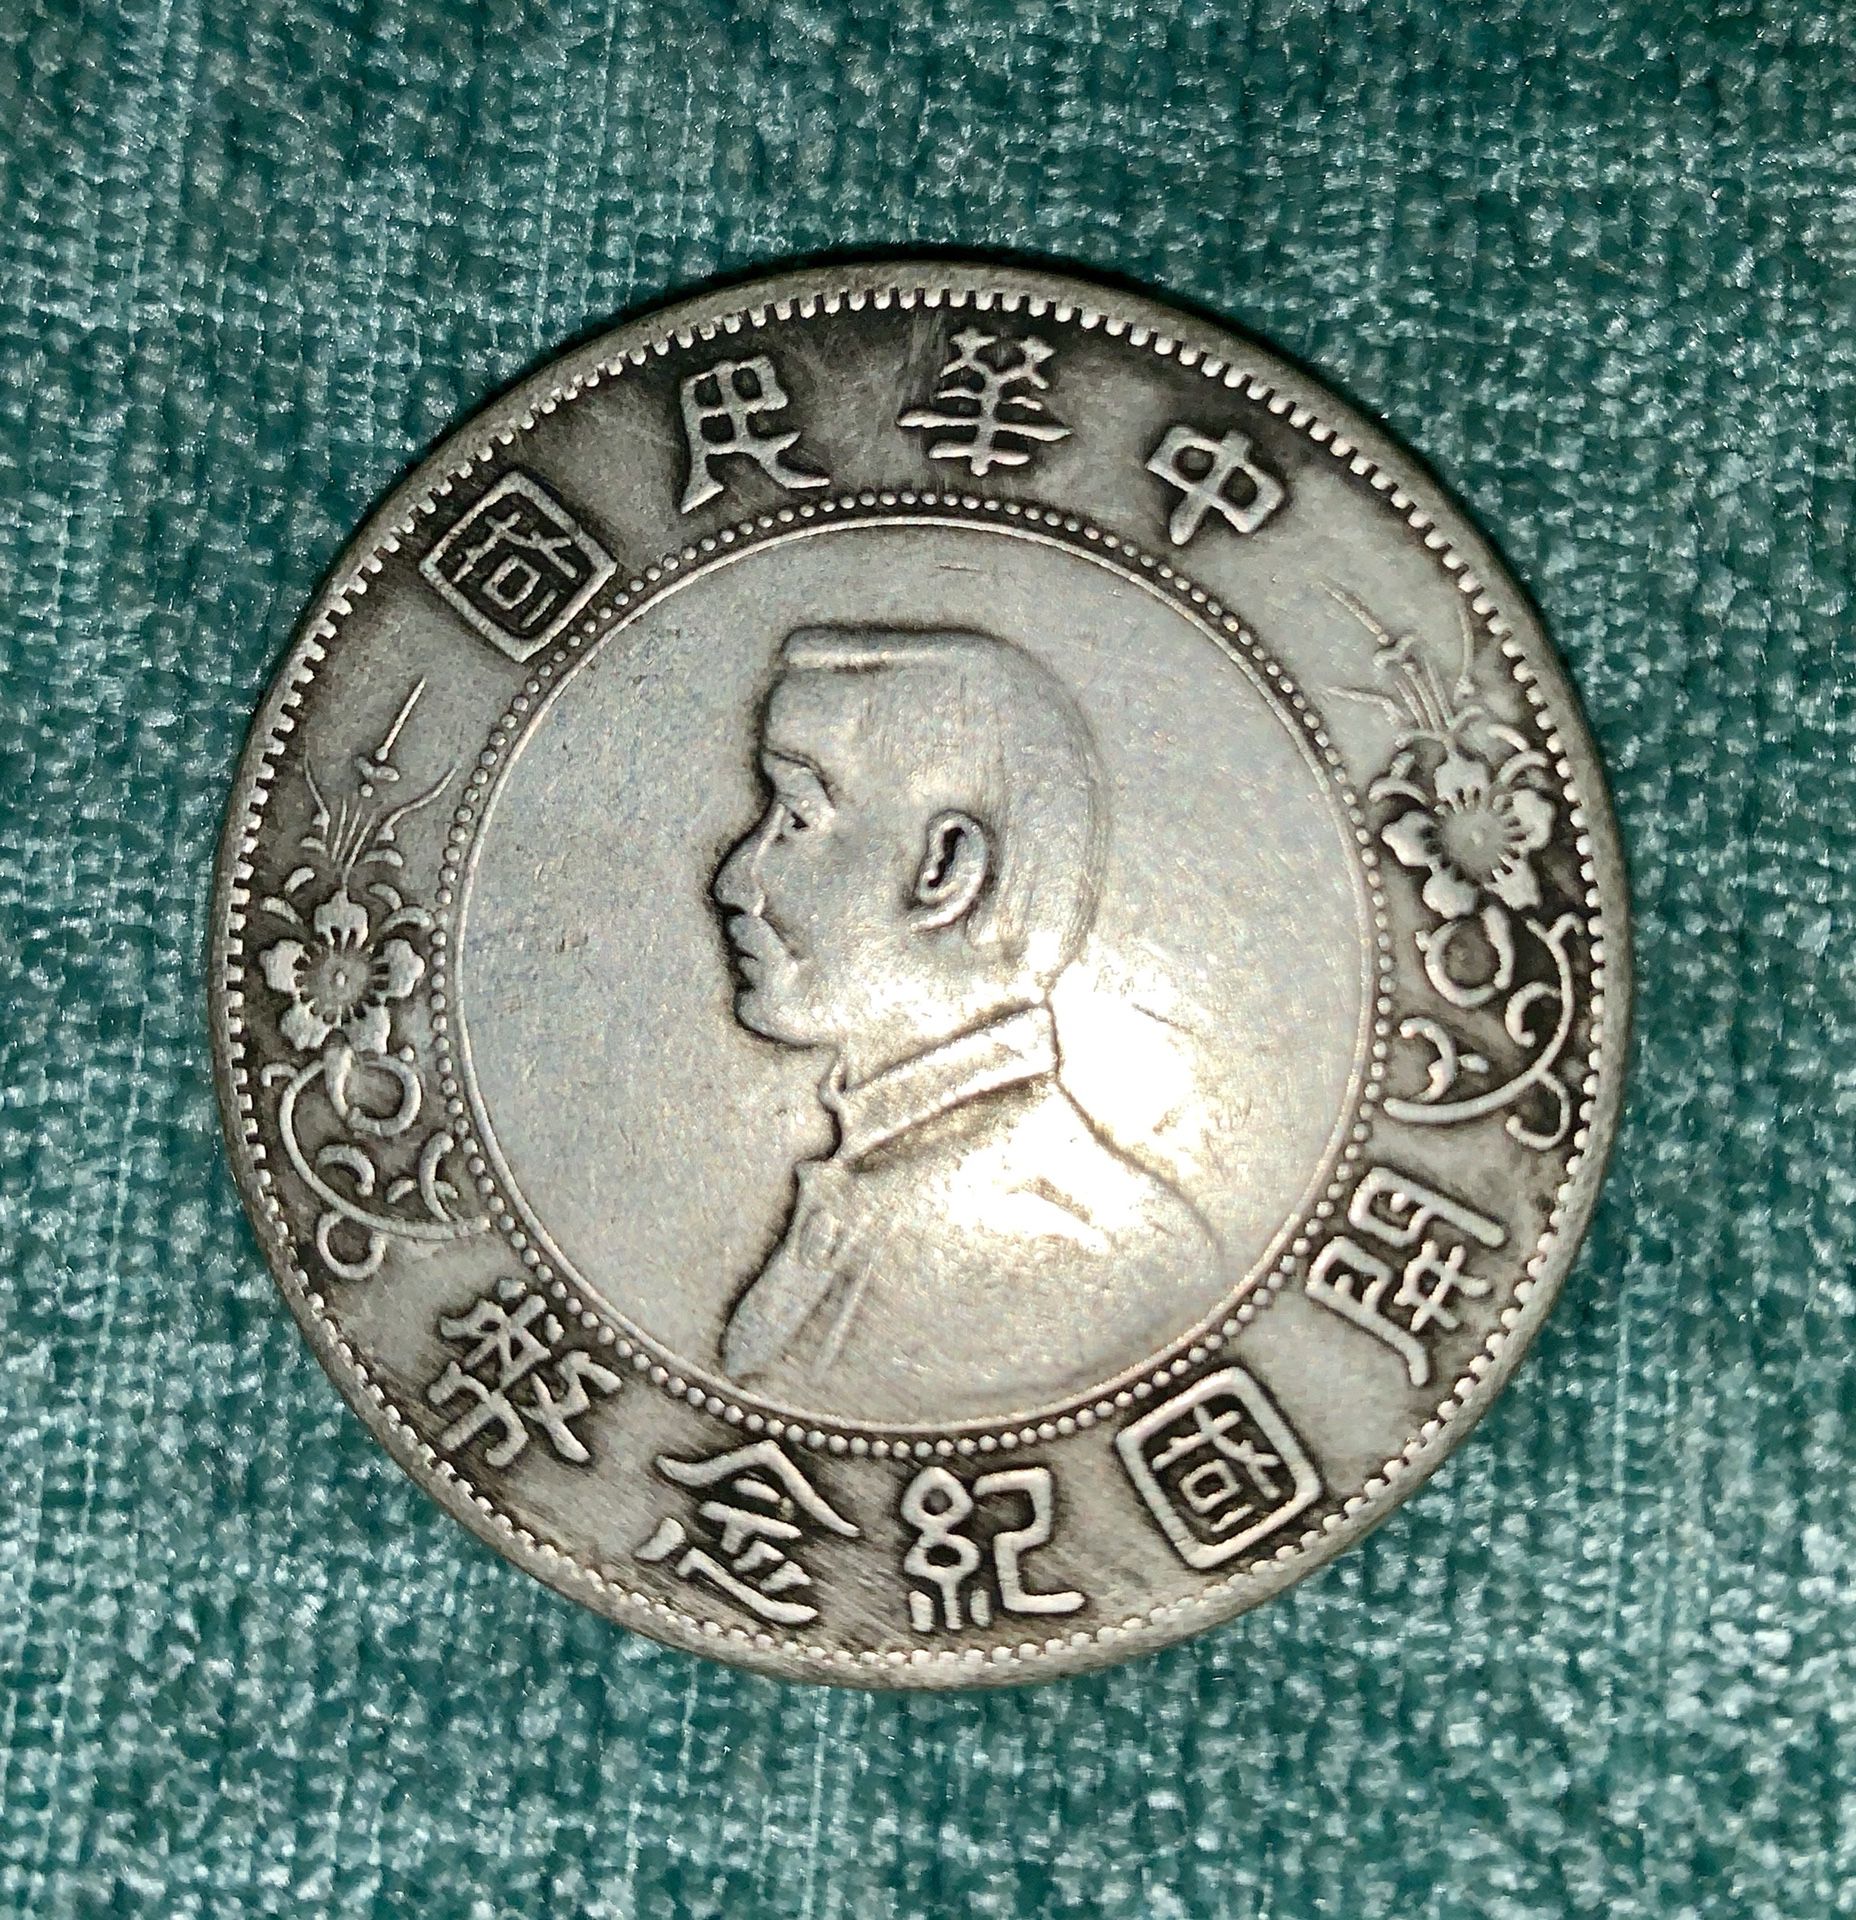 Antique Chinese token